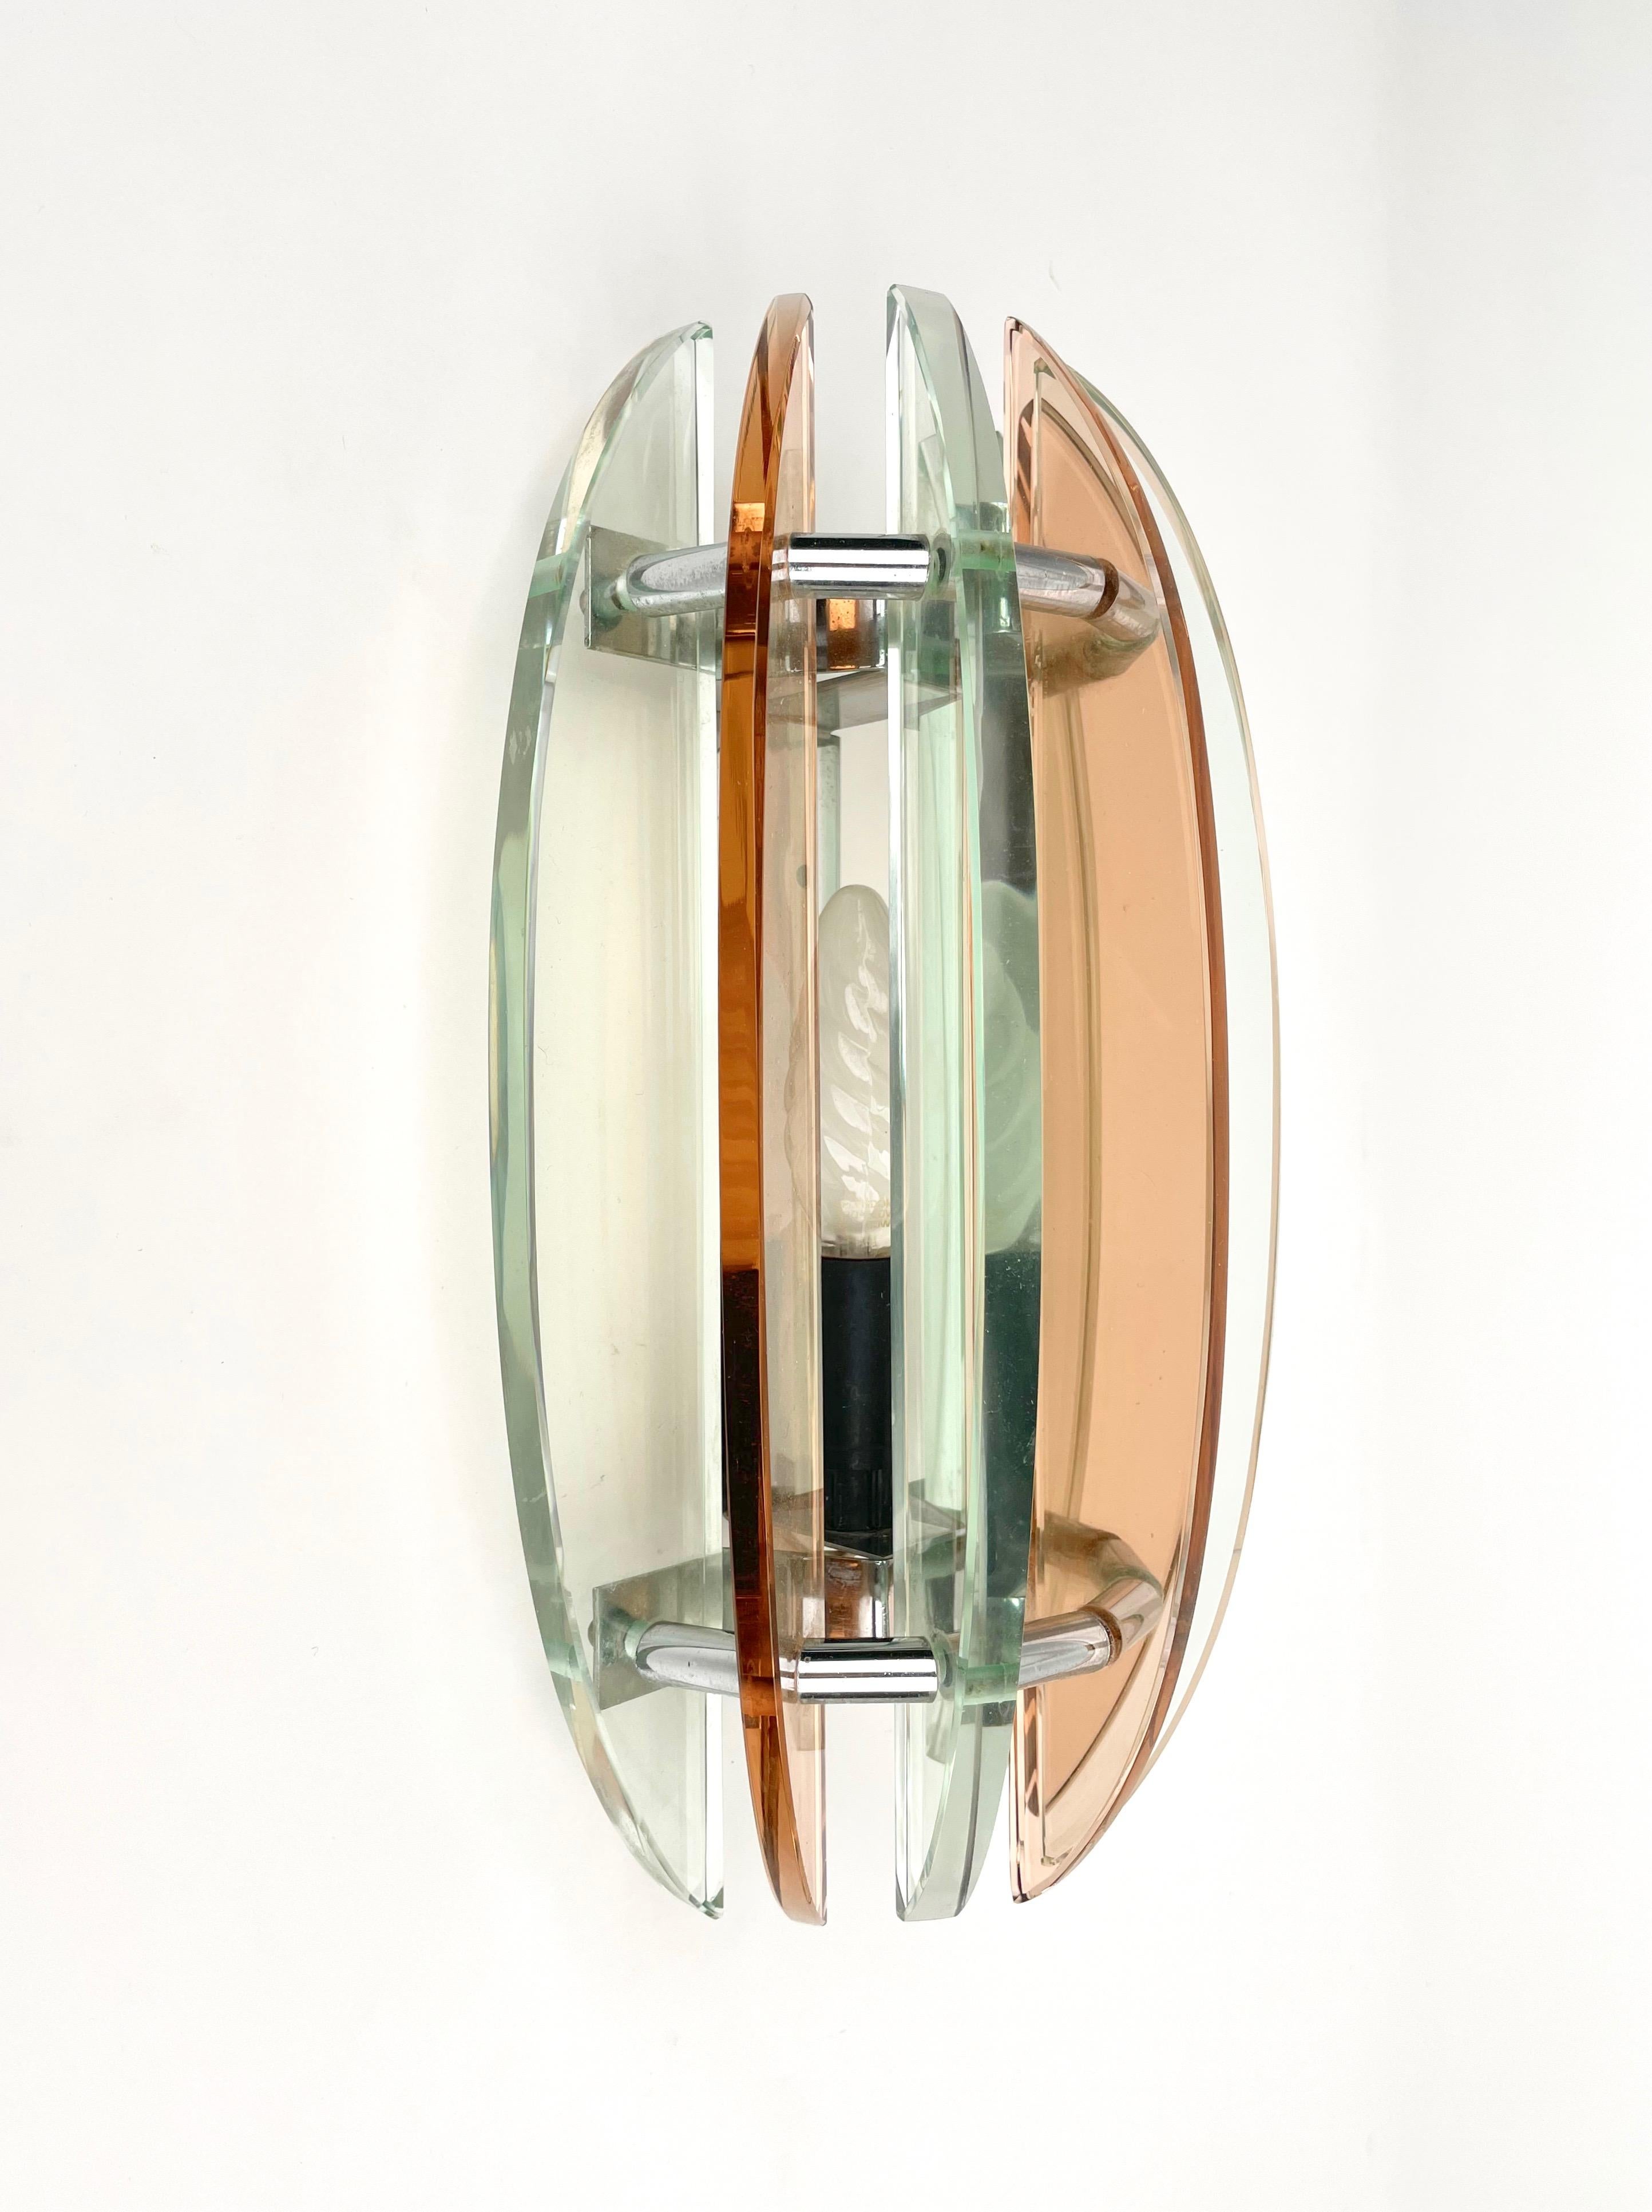 Late 20th Century Pair of Wall Sconces in Colored Glass and Chrome by Veca, Italy, 1970s For Sale